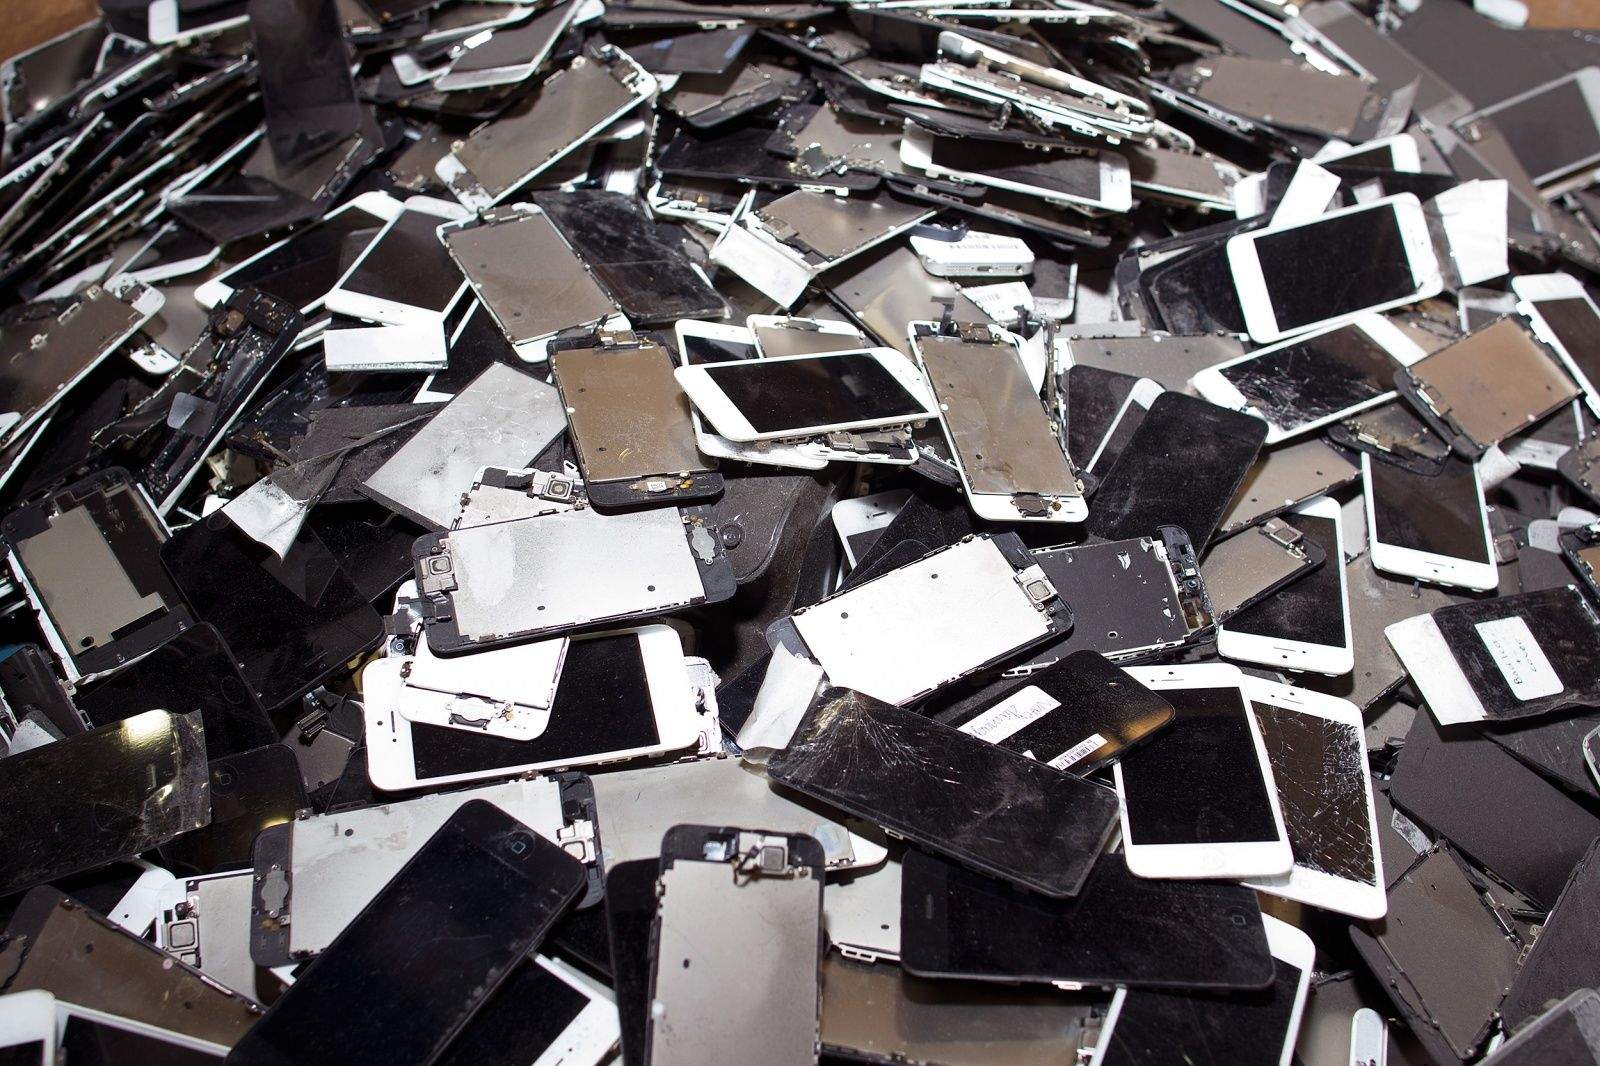 Smartphones await their fate at SIMS Recycling Solutions' mega-shredder facility in Roseville, California. Photo: Jim Merithew/Cult of Mac